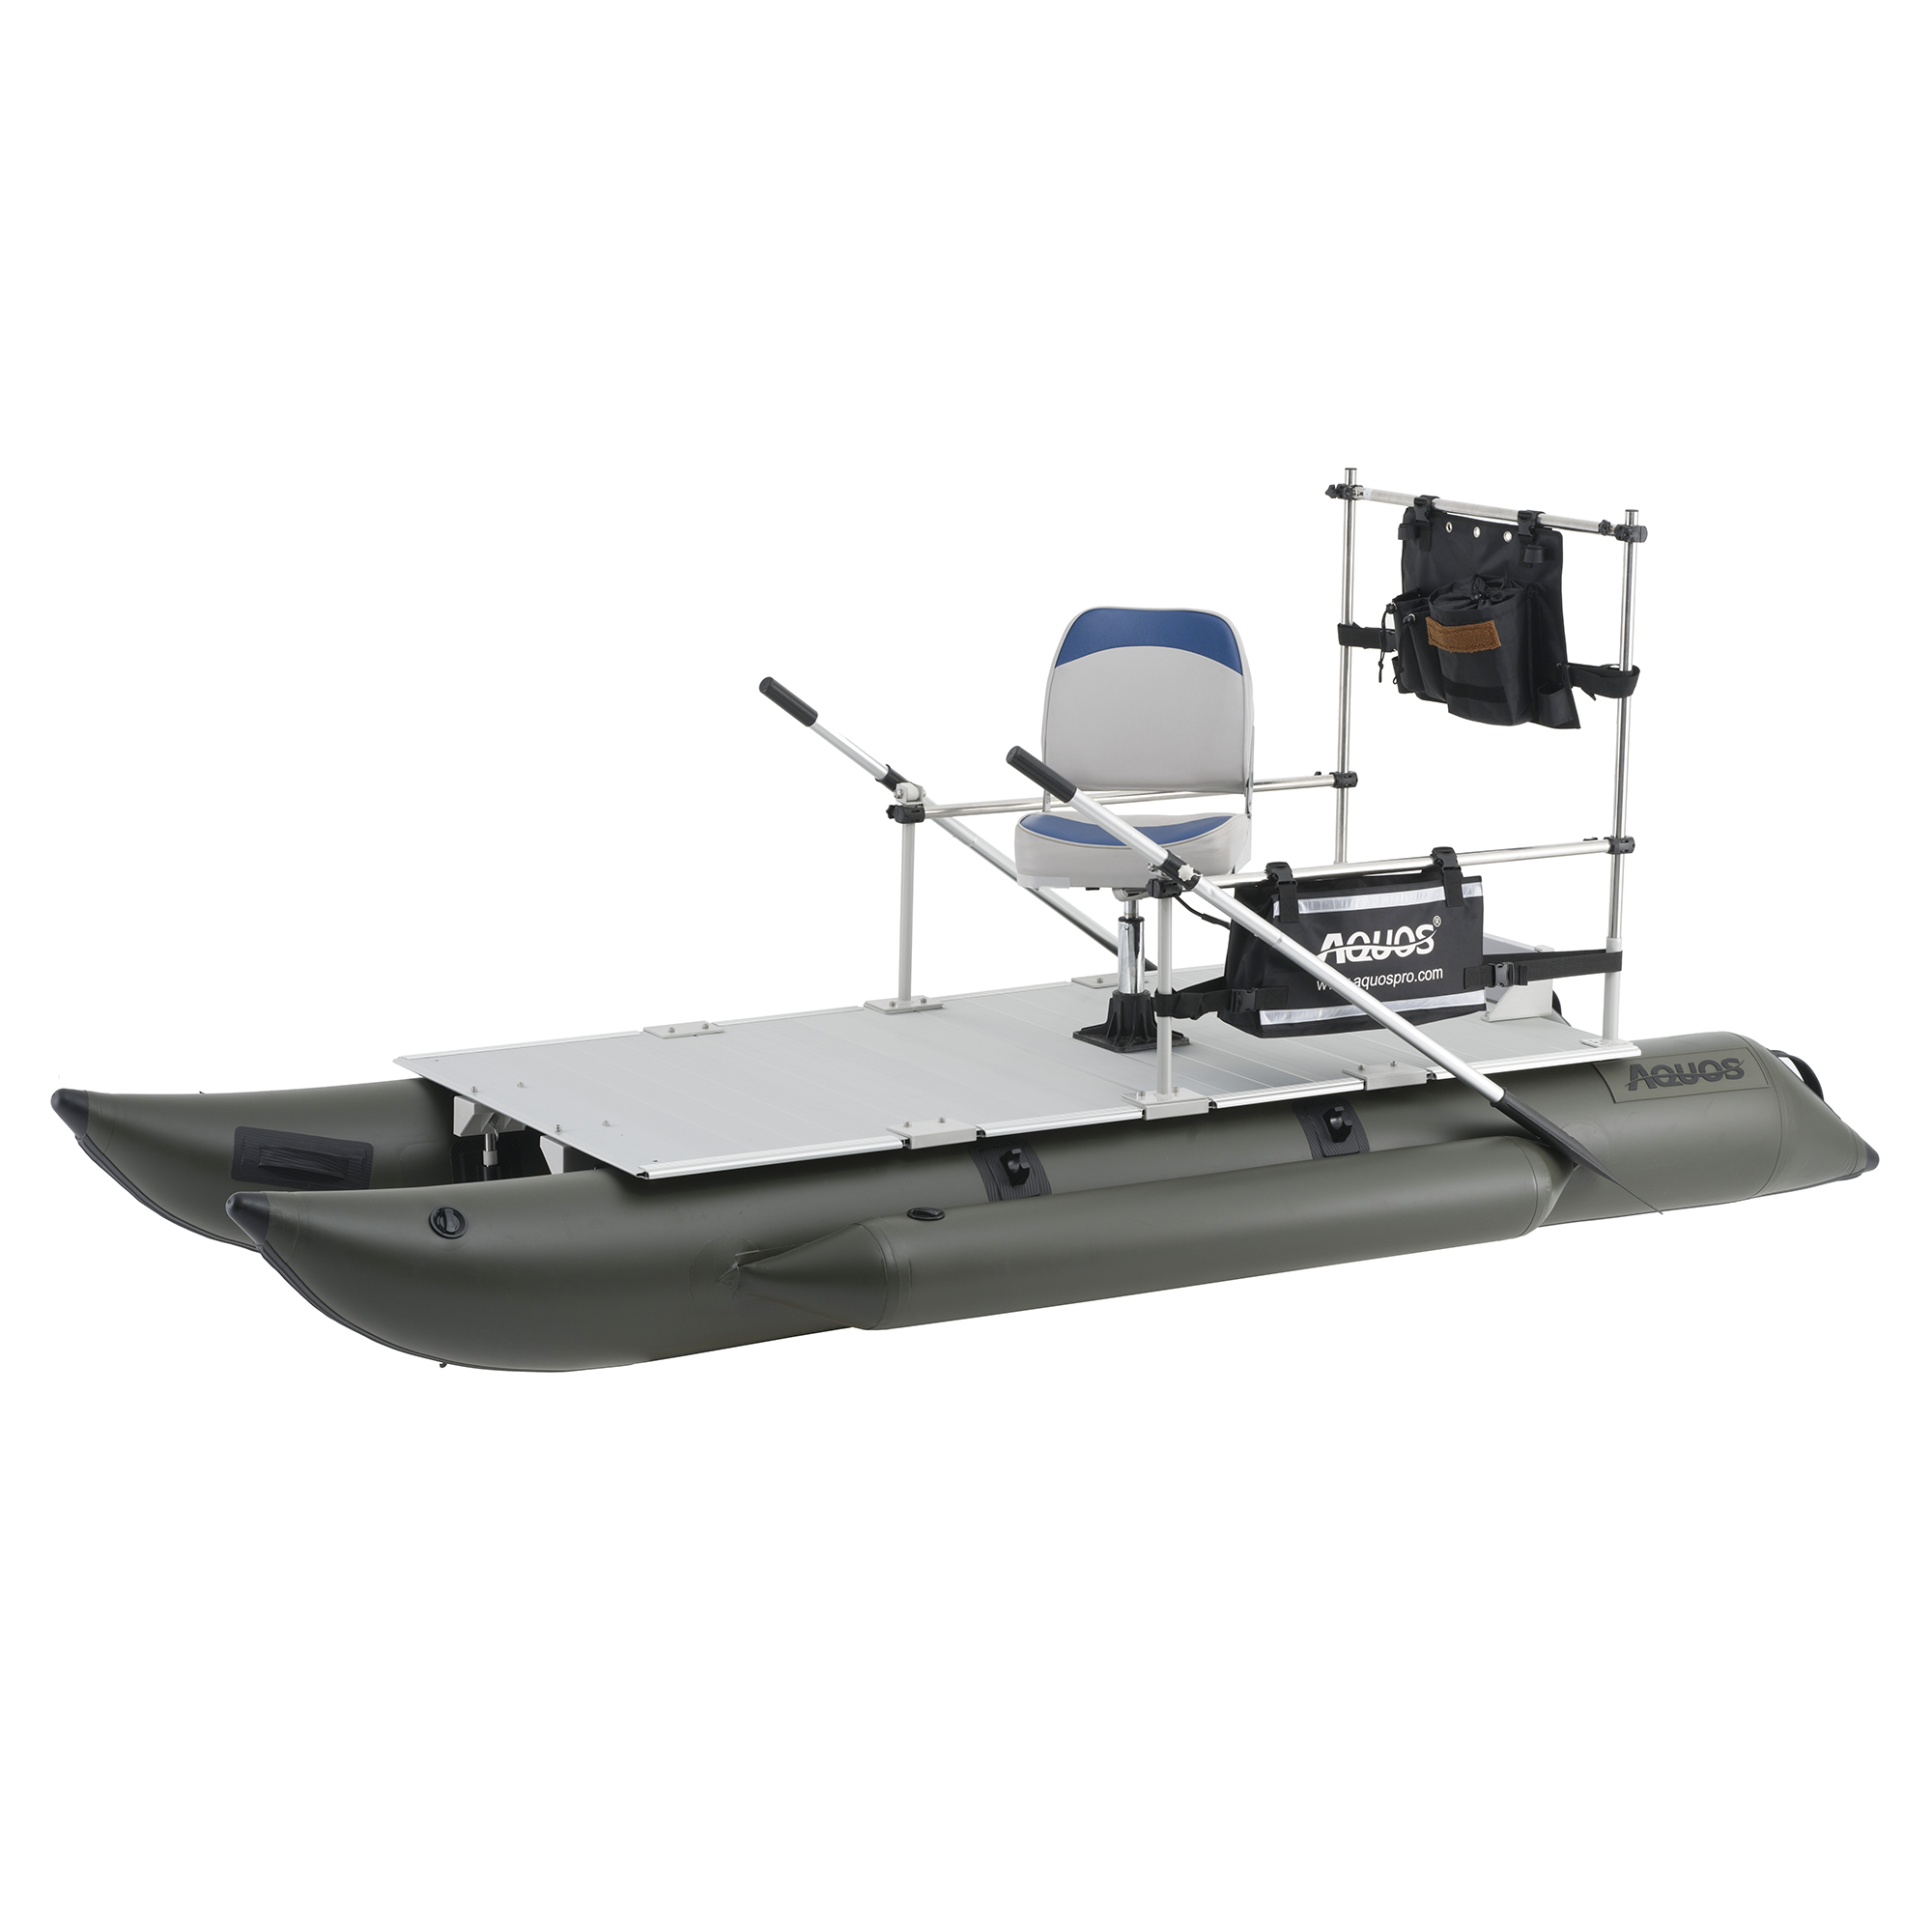 AQUOS New Heavy-Duty for Two Series 11.5 ft Inflatable Pontoon Boat